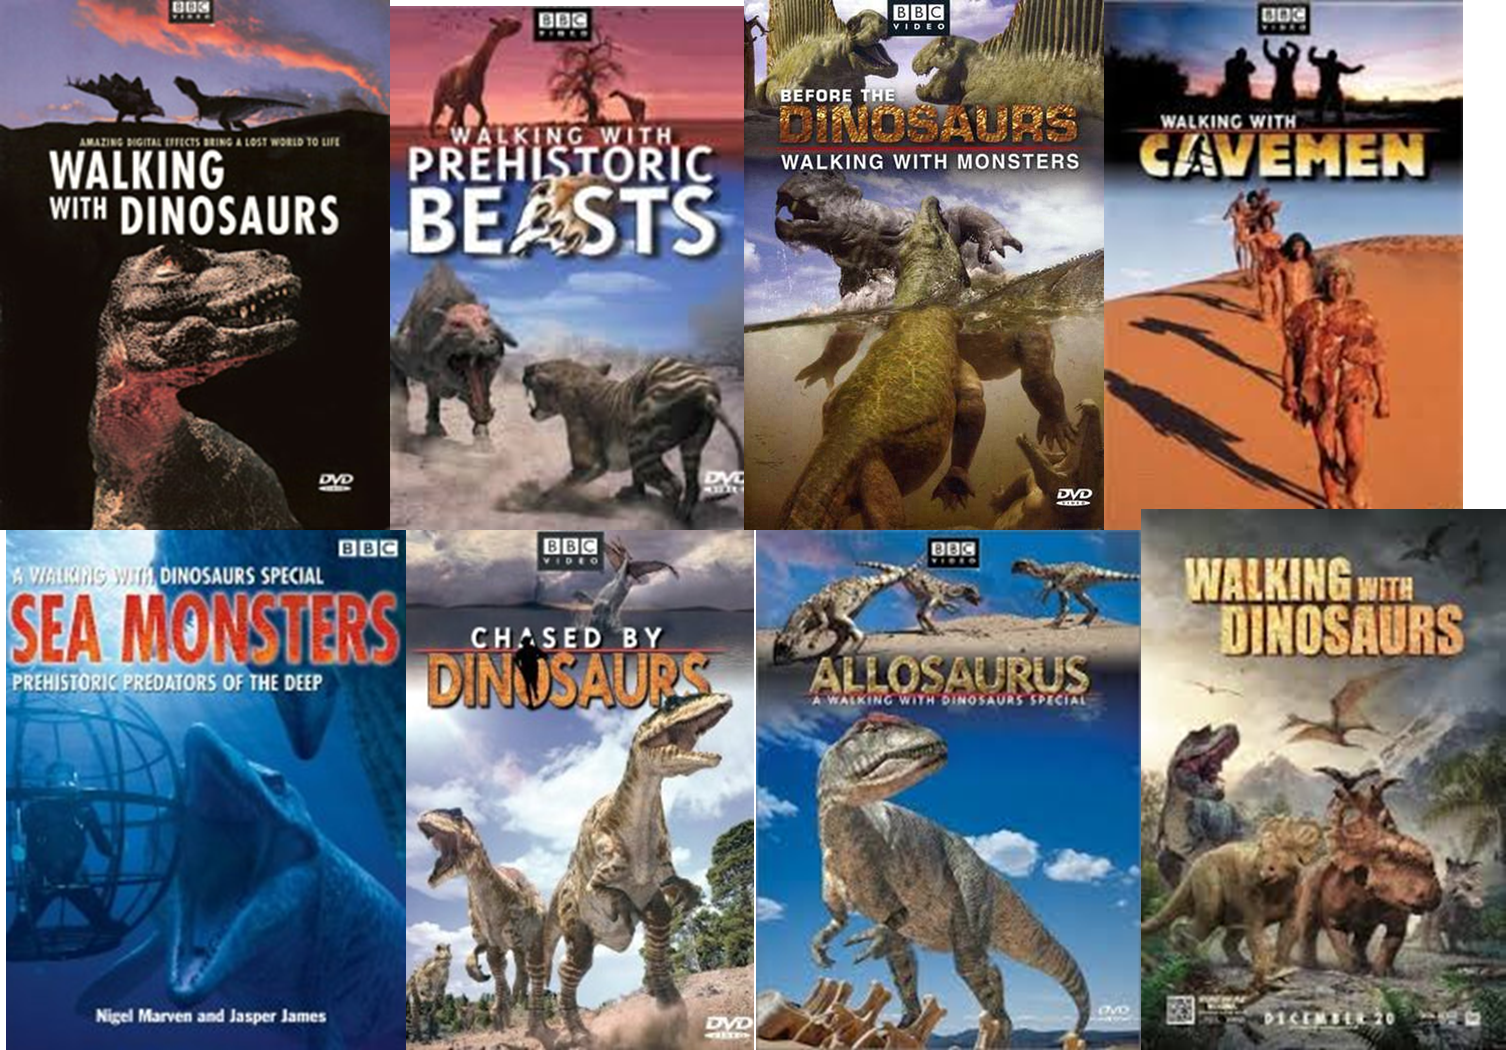 a walking with dinosaurs